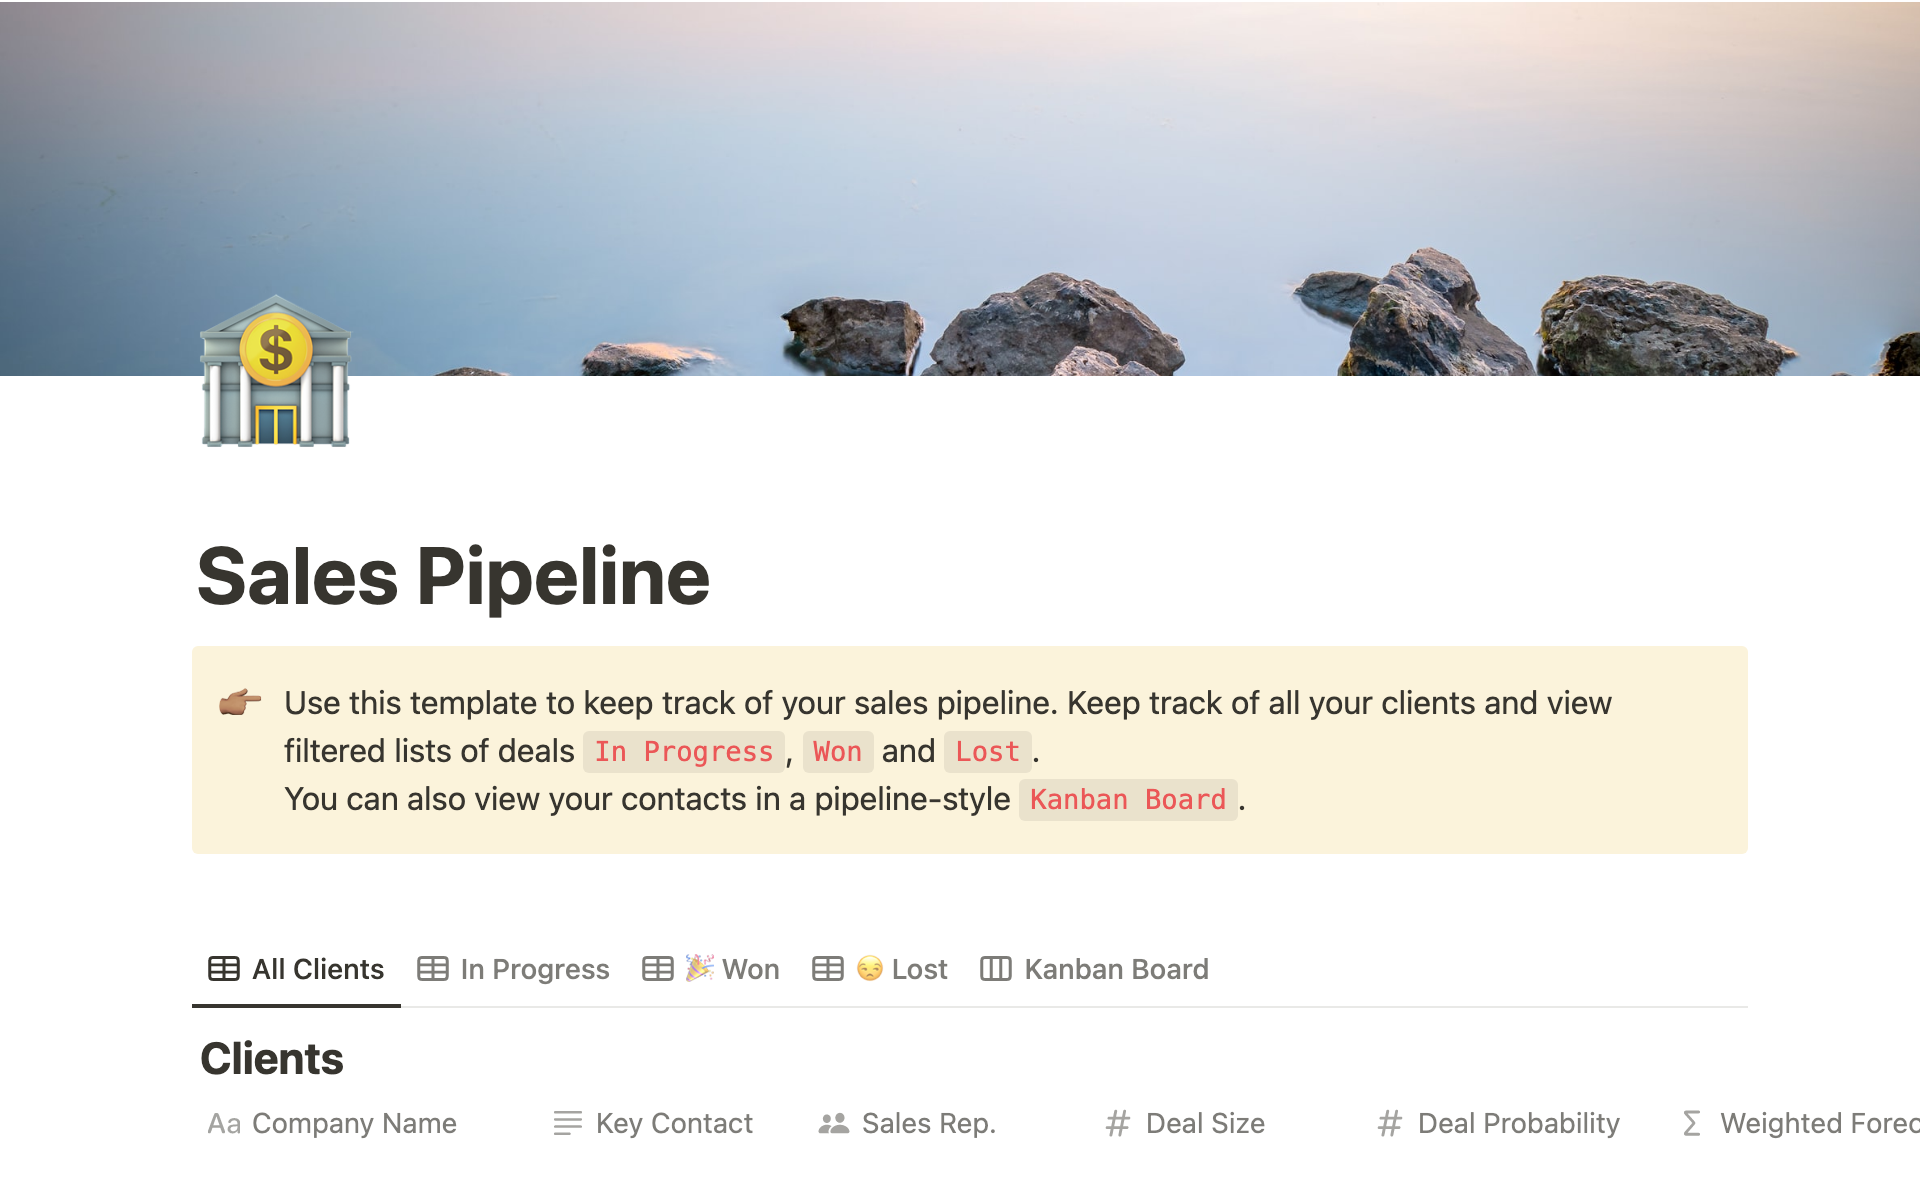 Use this template to keep track of your sales pipeline in Notion.